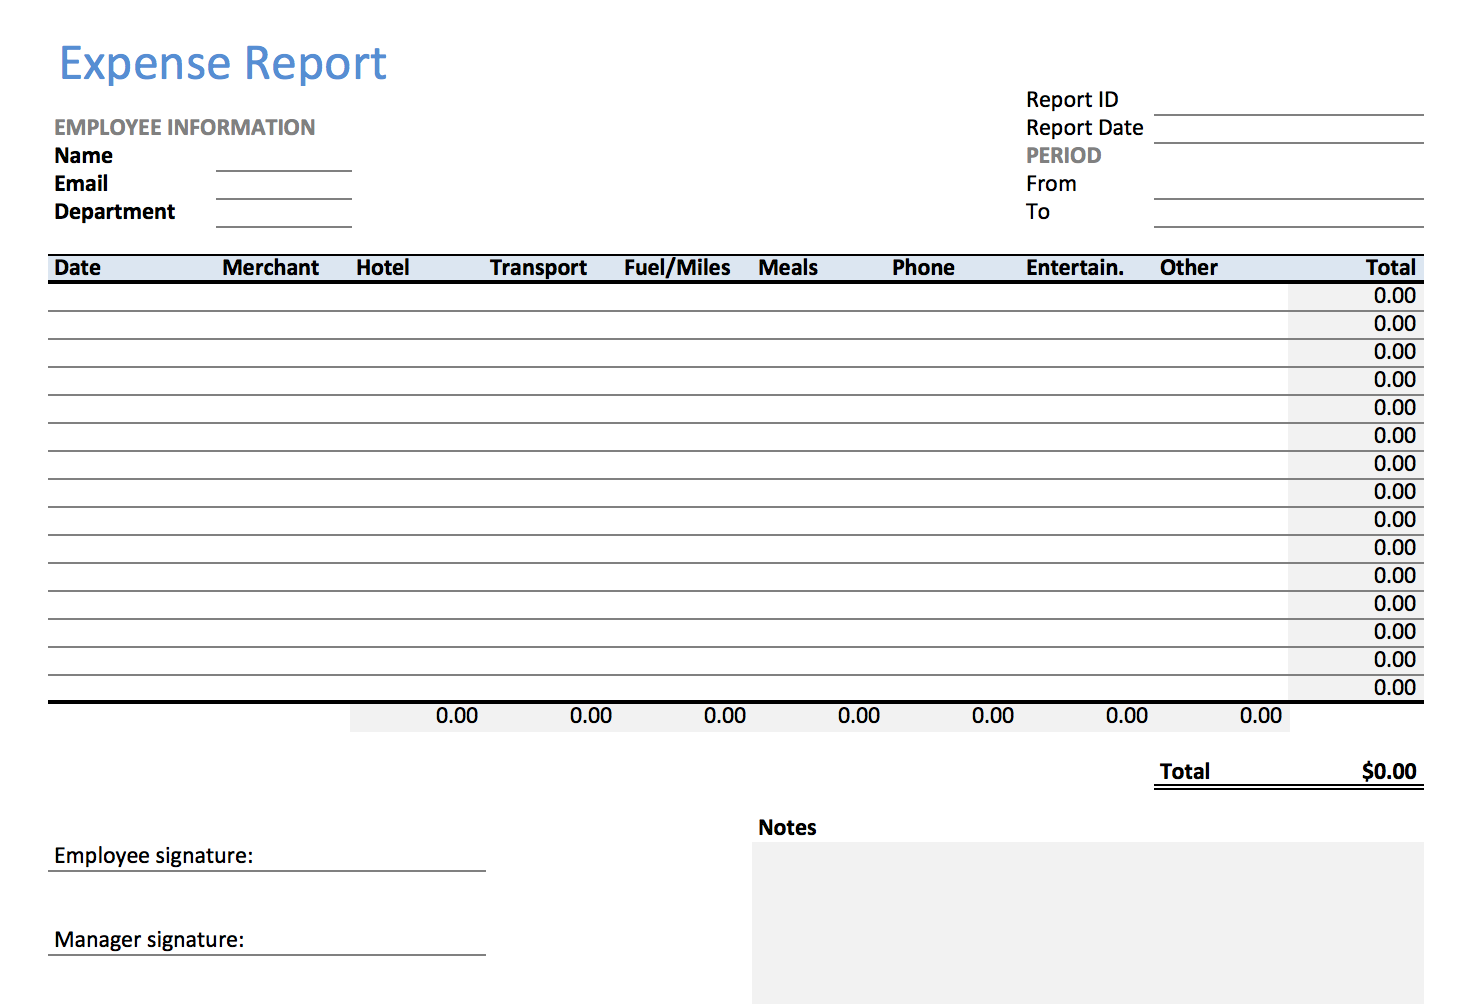 Excel Expense Report Template - KEEPEK Inside Expense Report Template Xls